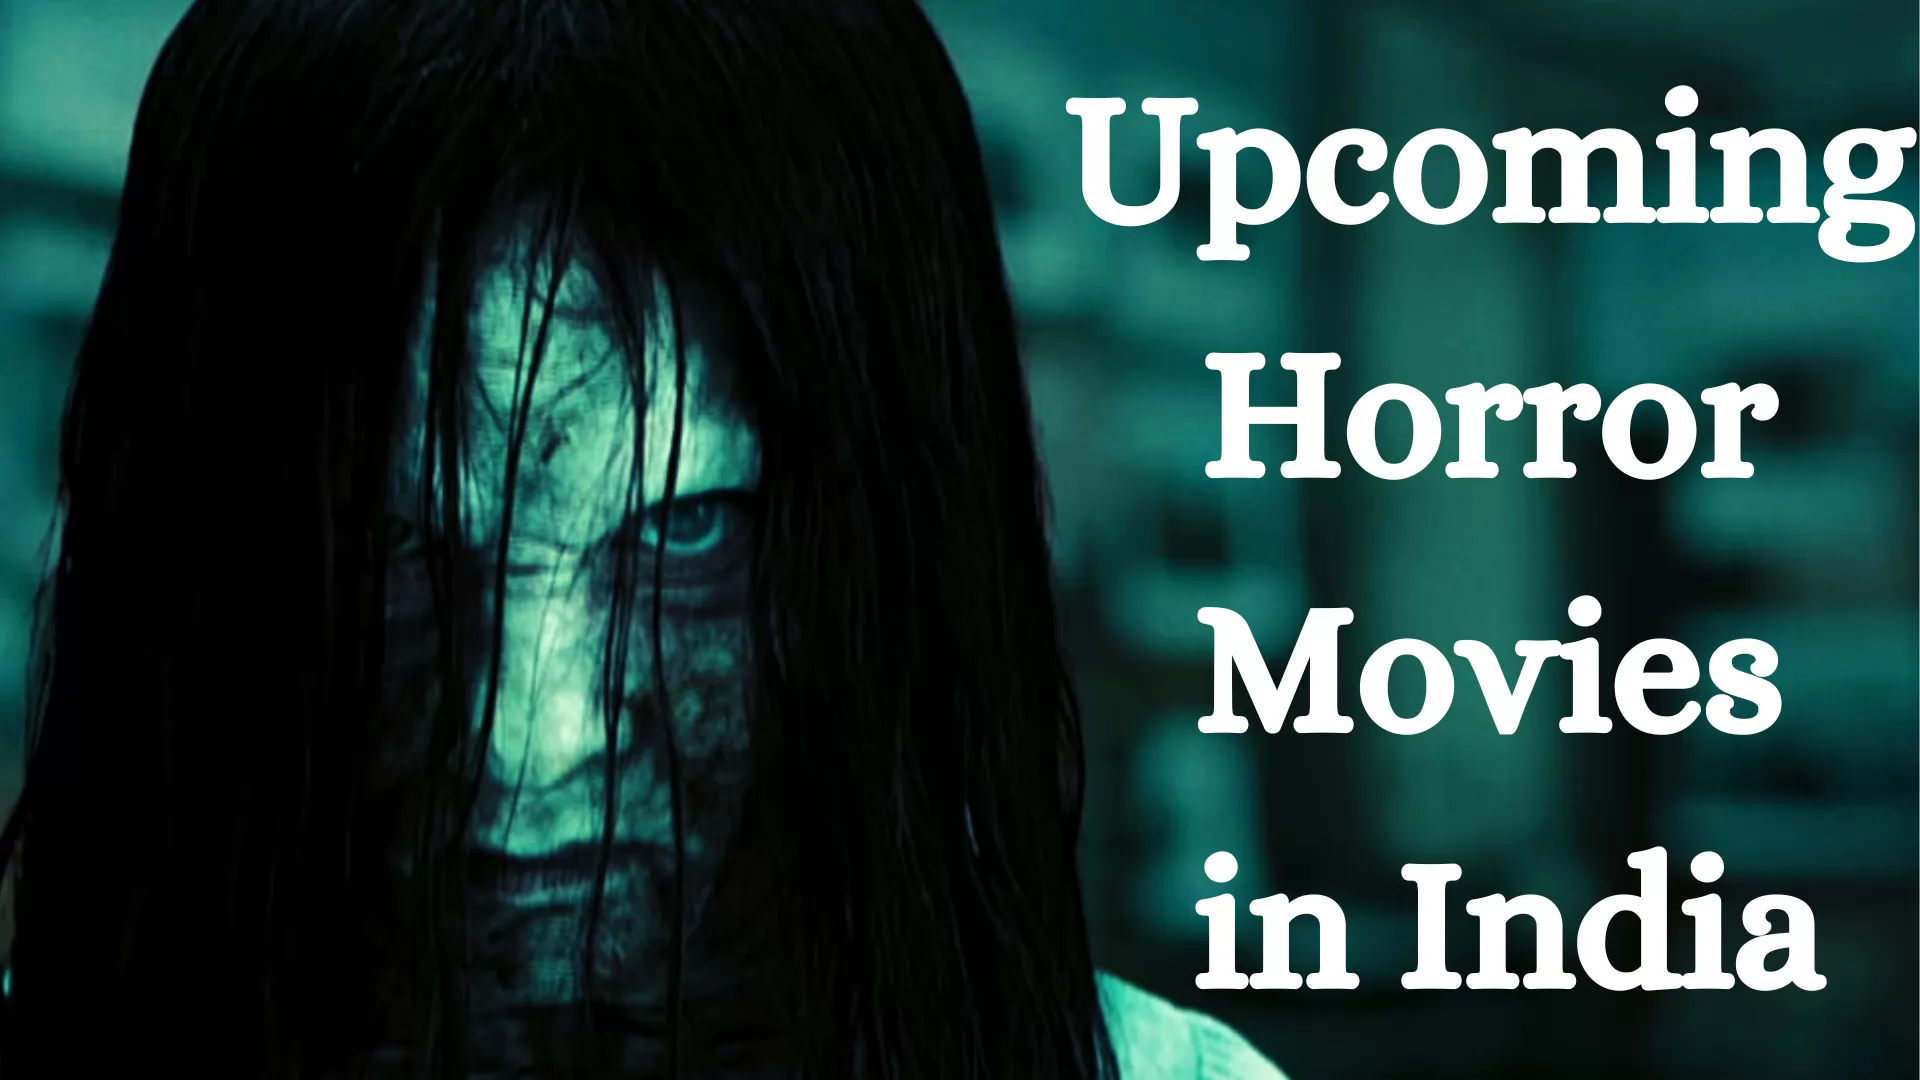 Upcoming Horror Movies in India